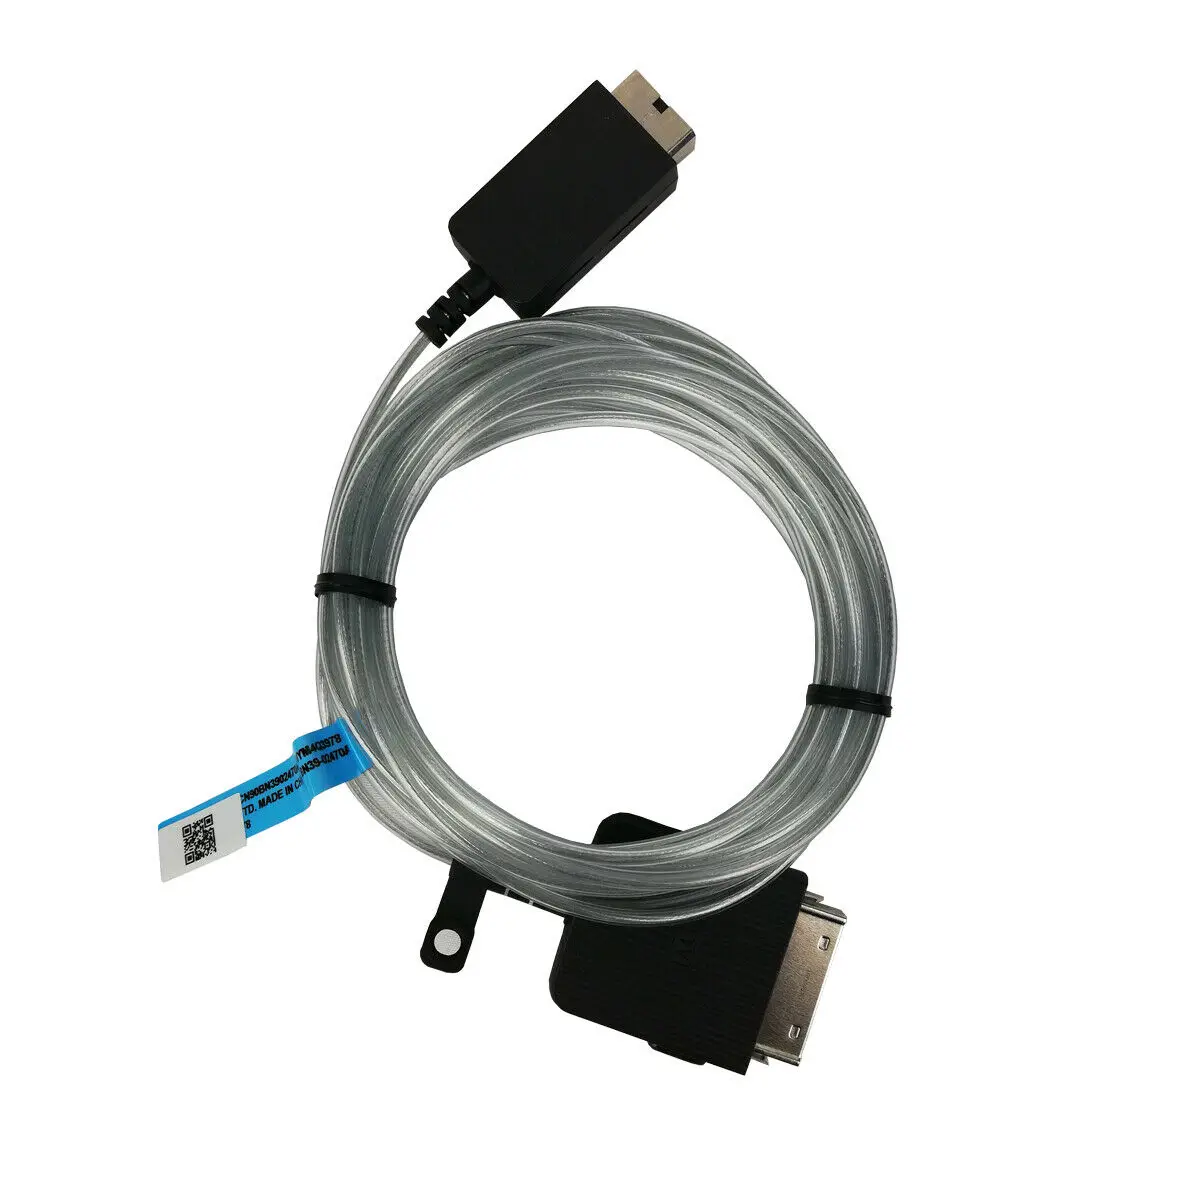 New Original BN39-02470A One Connect Cable Fiberoptic For Samsung QLED TV RU Series One Connect Box